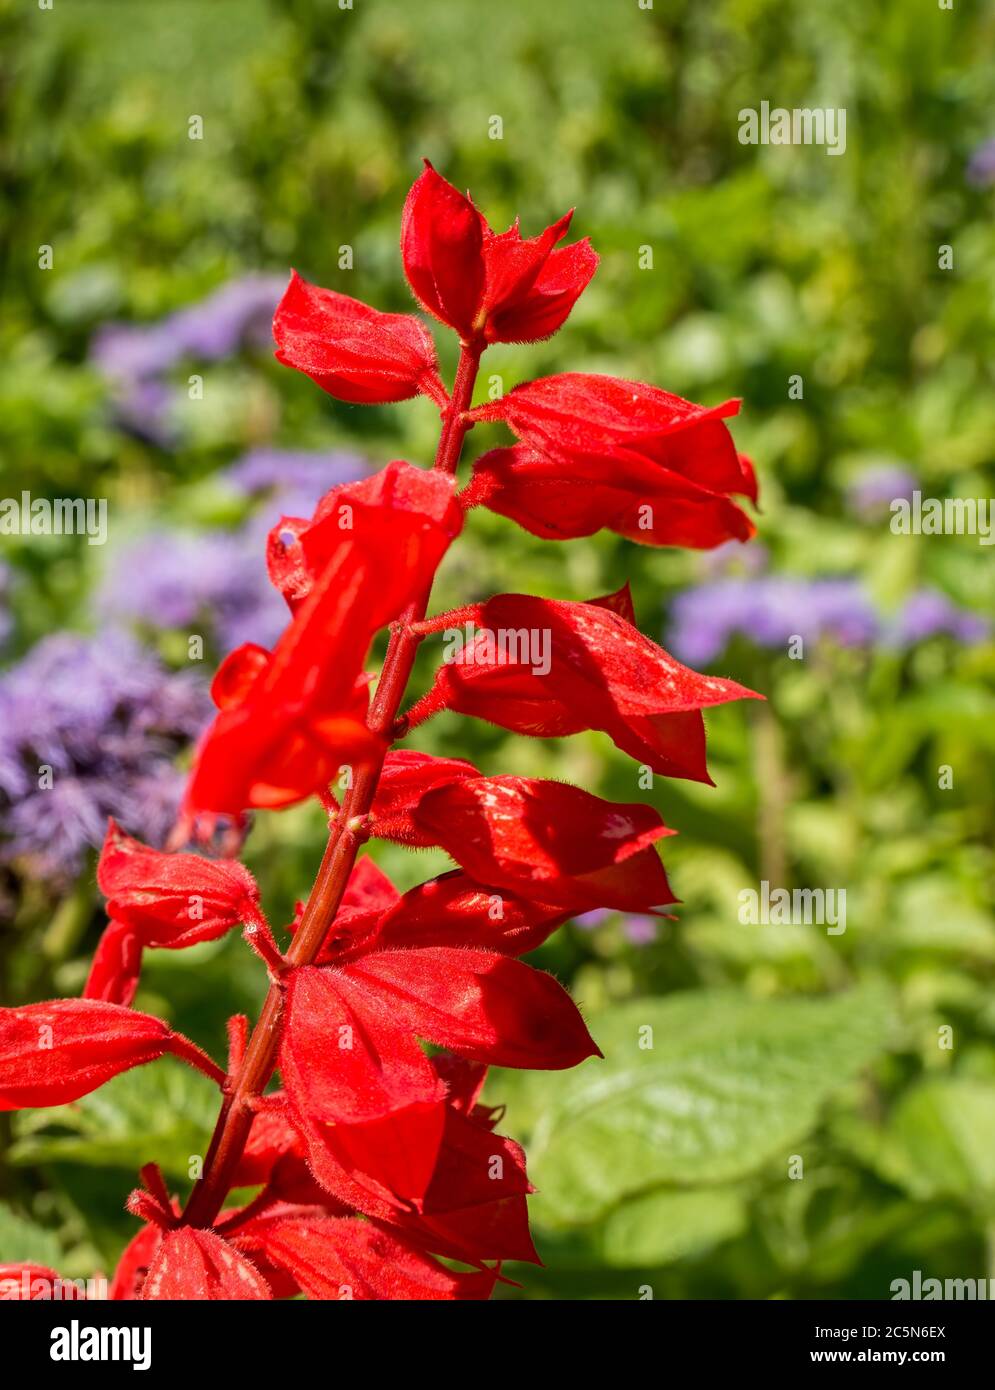 Close up detail with Salvia splendens or the scarlet sage red flower on blurred background. Stock Photo